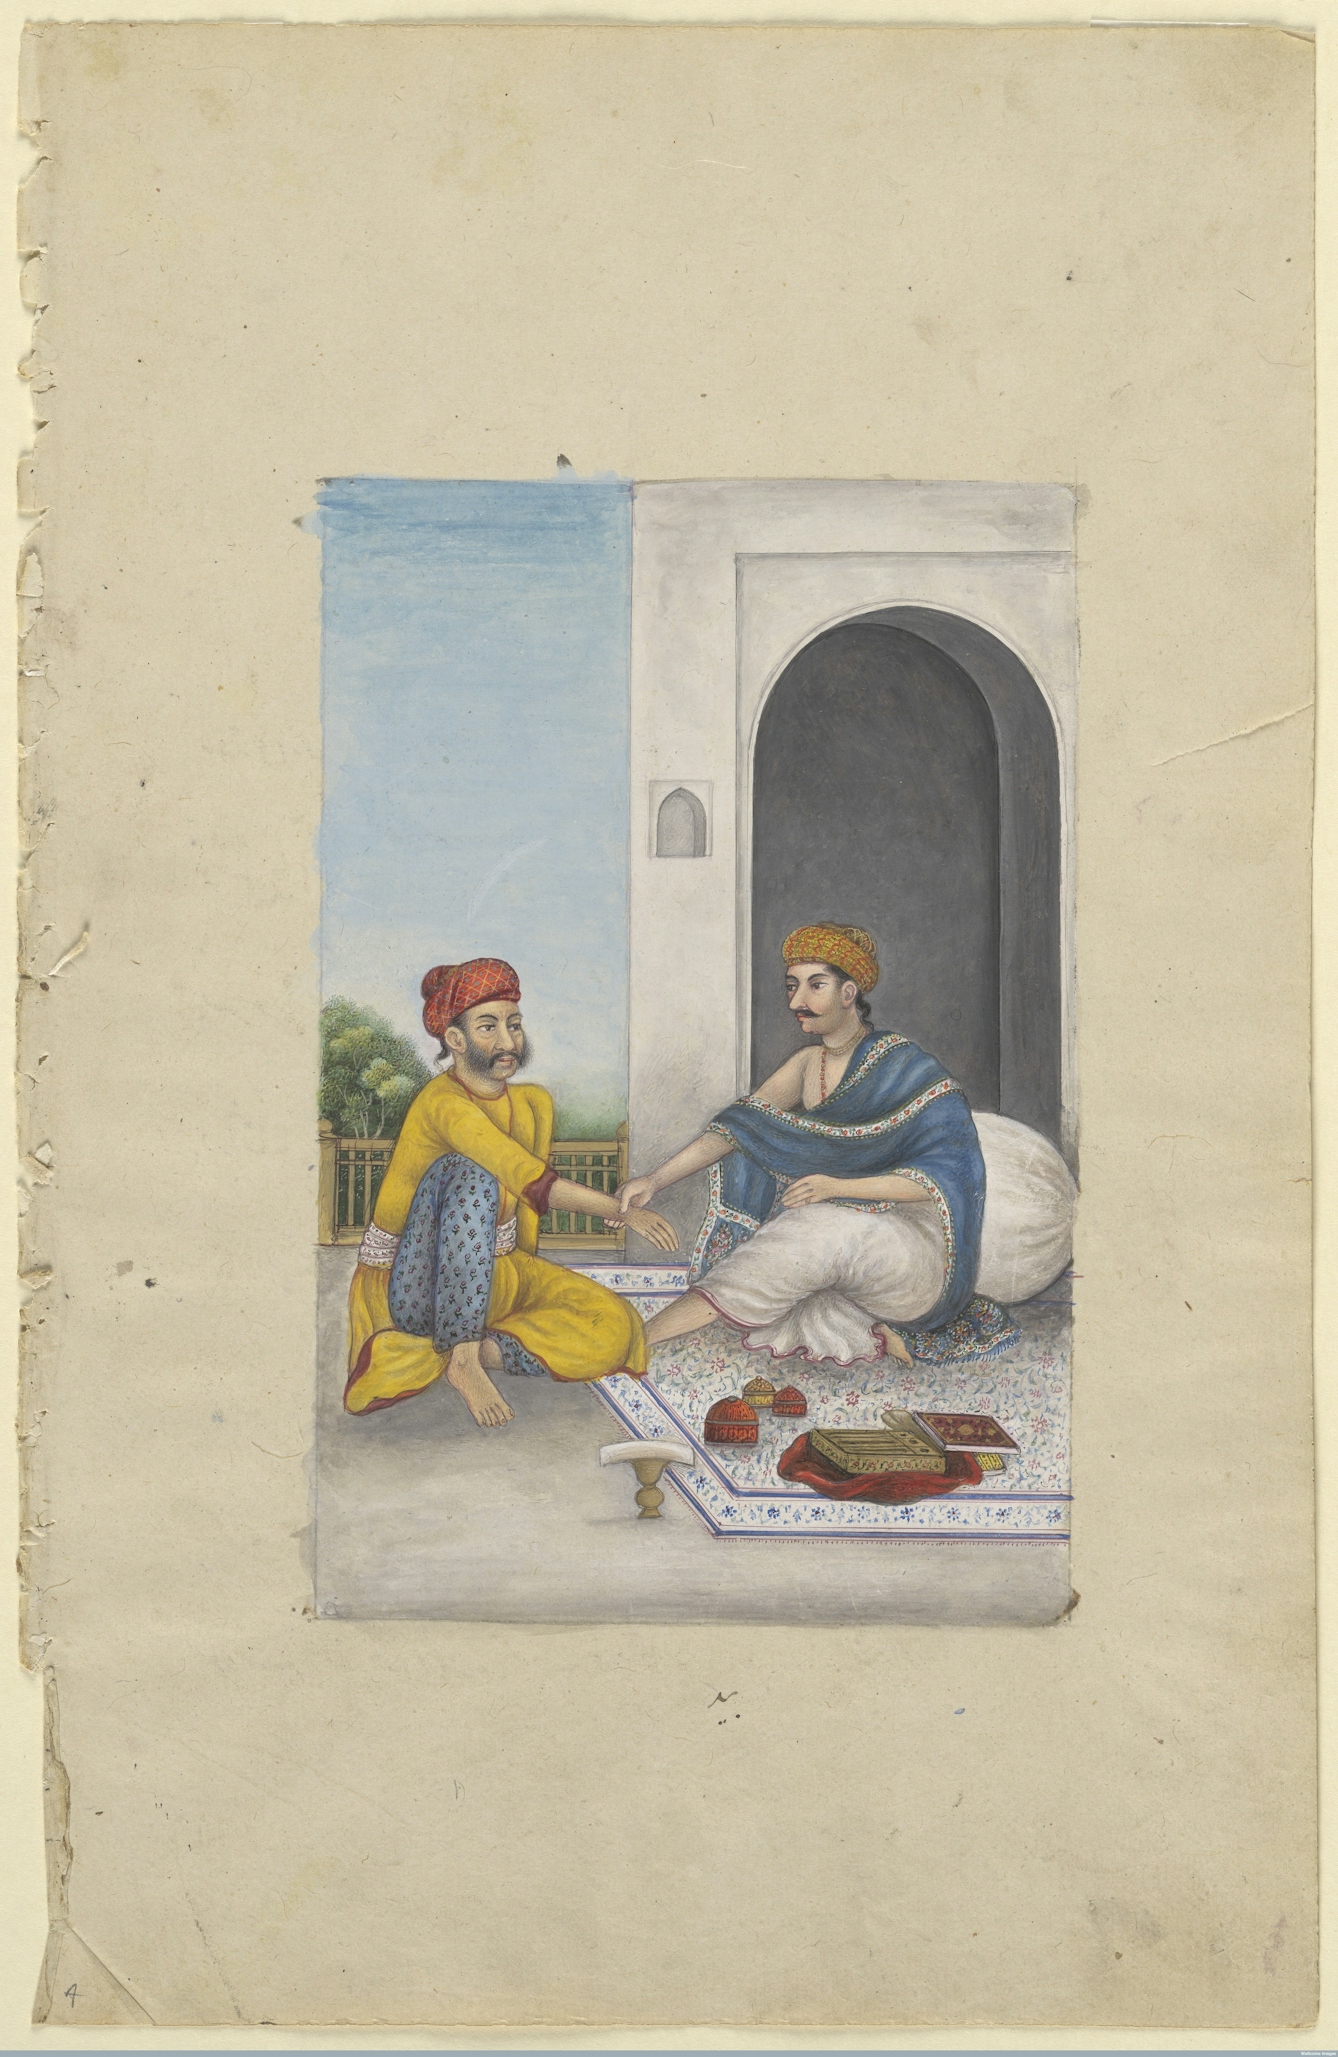 Gouache painting showing an Ayurvedic practitioner taking the pulse.